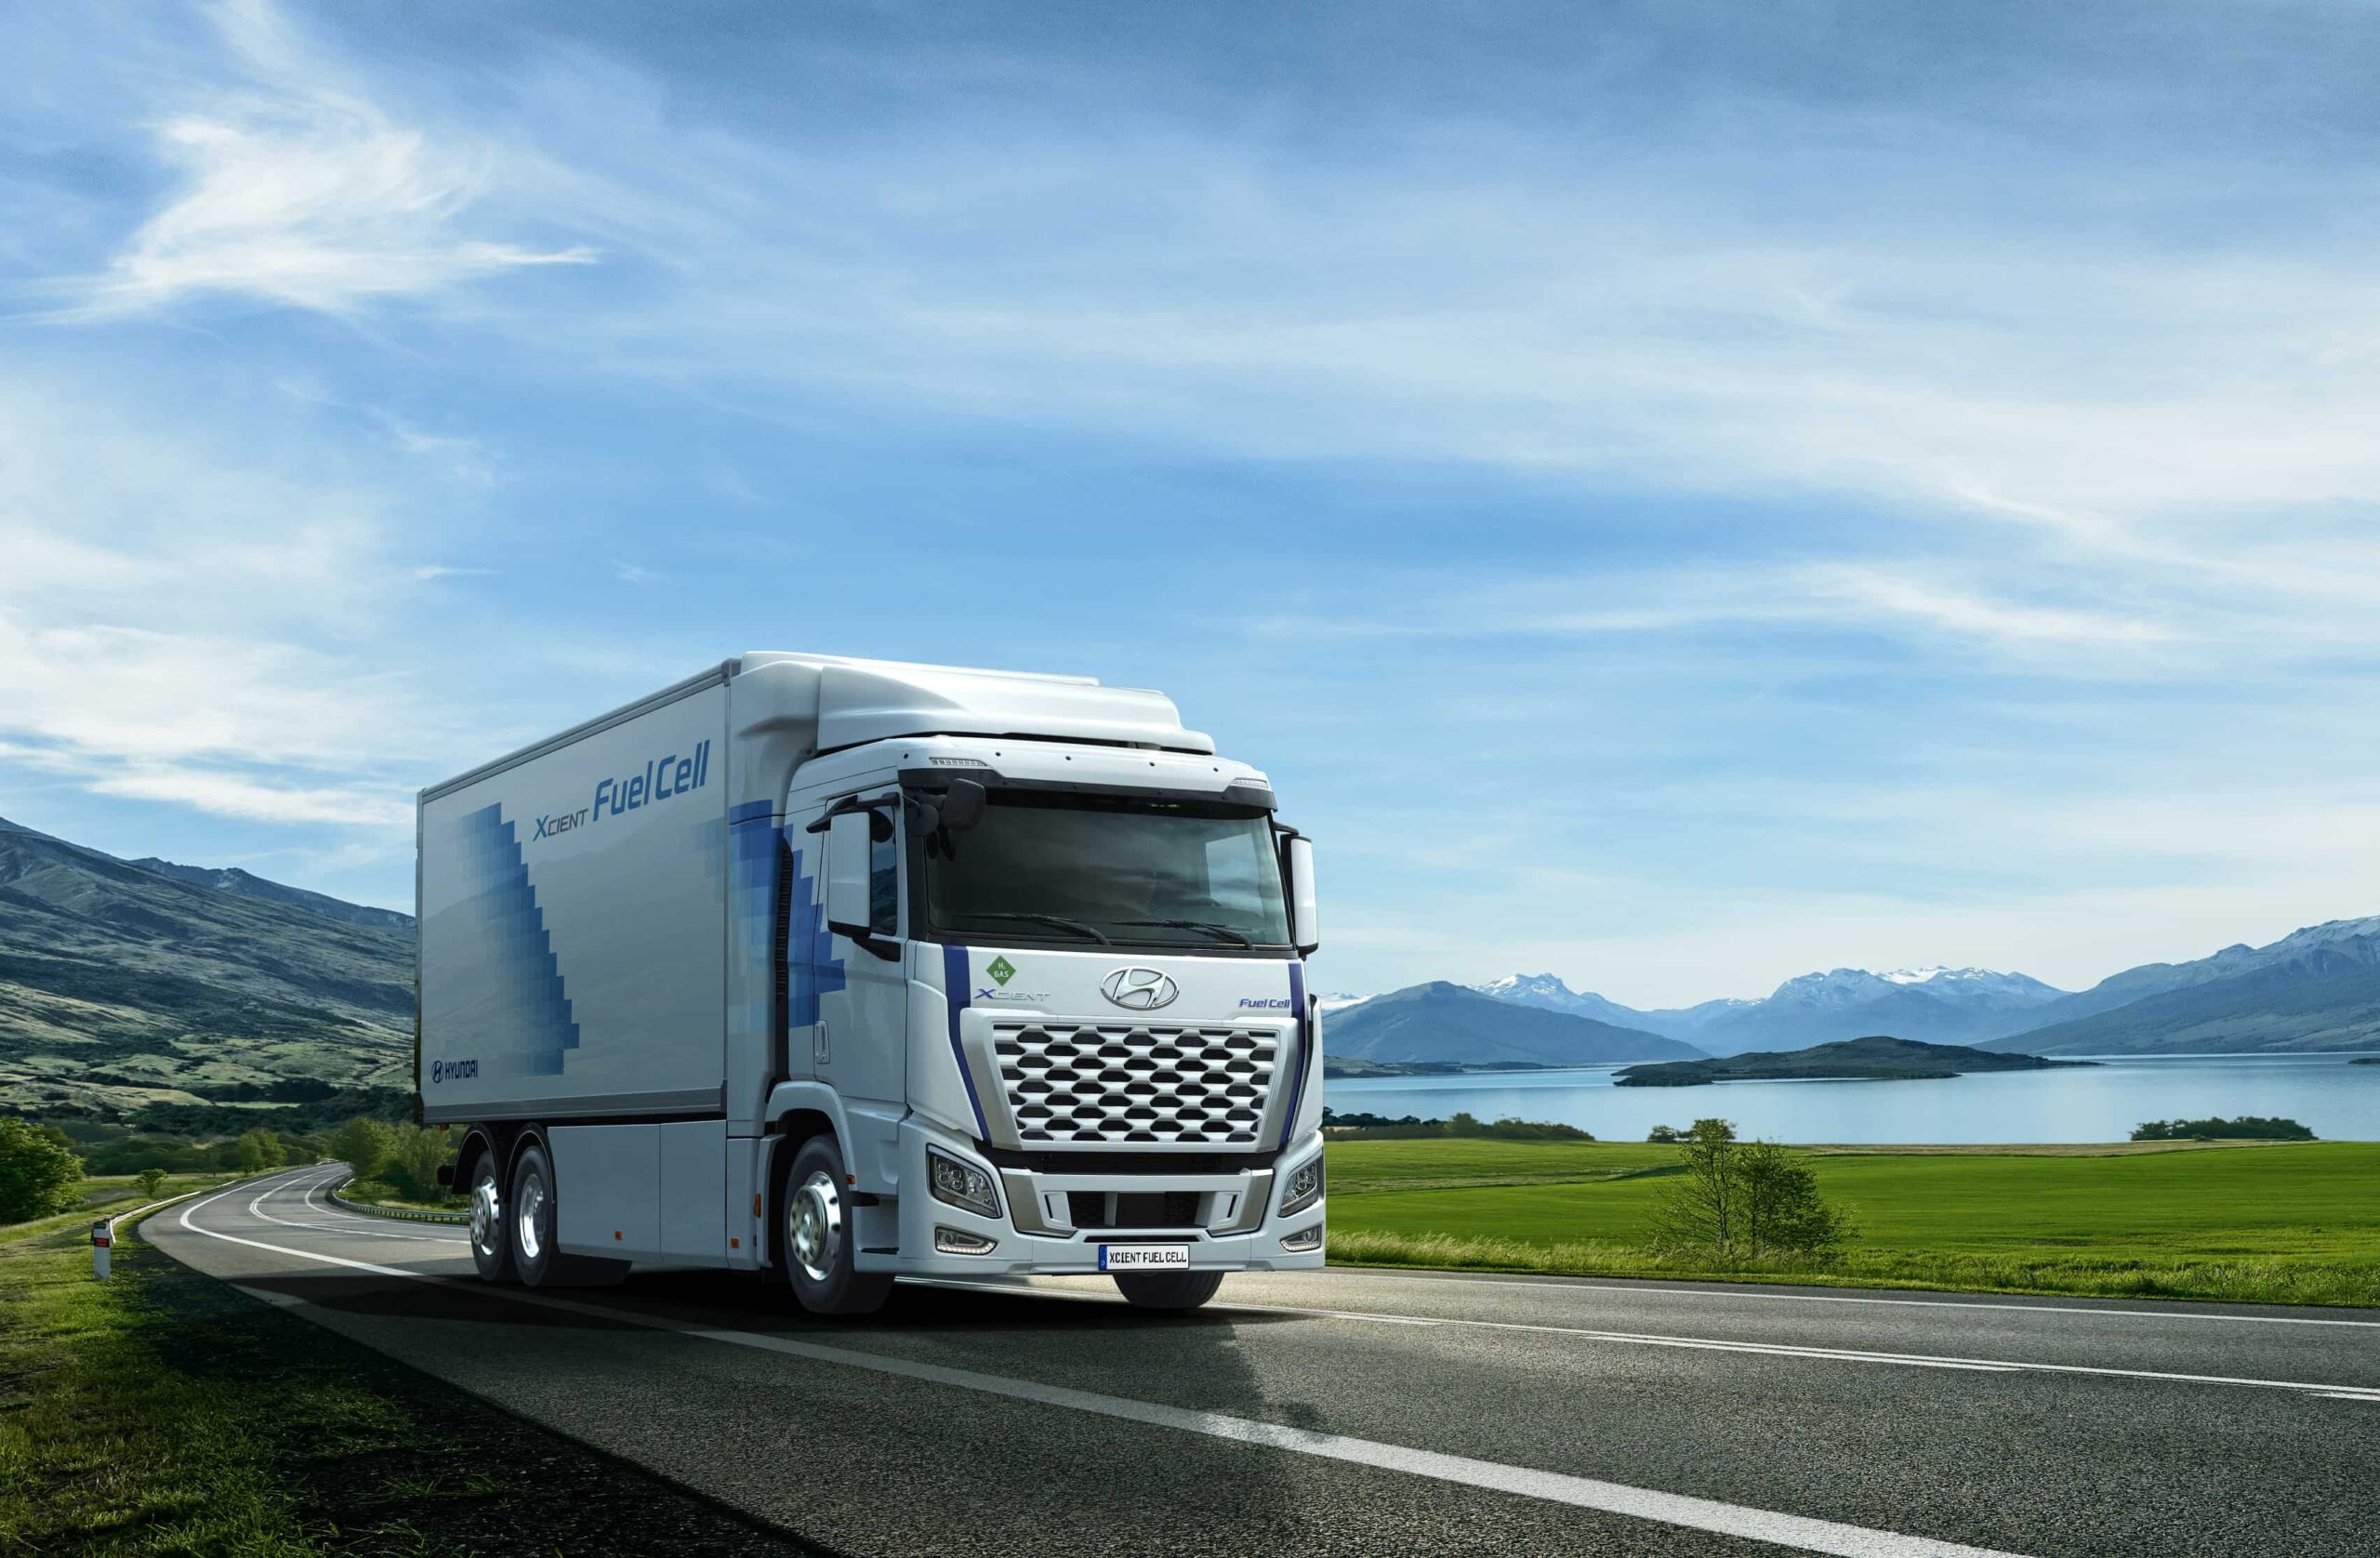 Hyundai's XCIENT Fuel Cell trucks surpass 10 million km in Switzerland, showcasing advanced hydrogen technology and reducing carbon emissions equivalent to 700,000 pine trees annually.